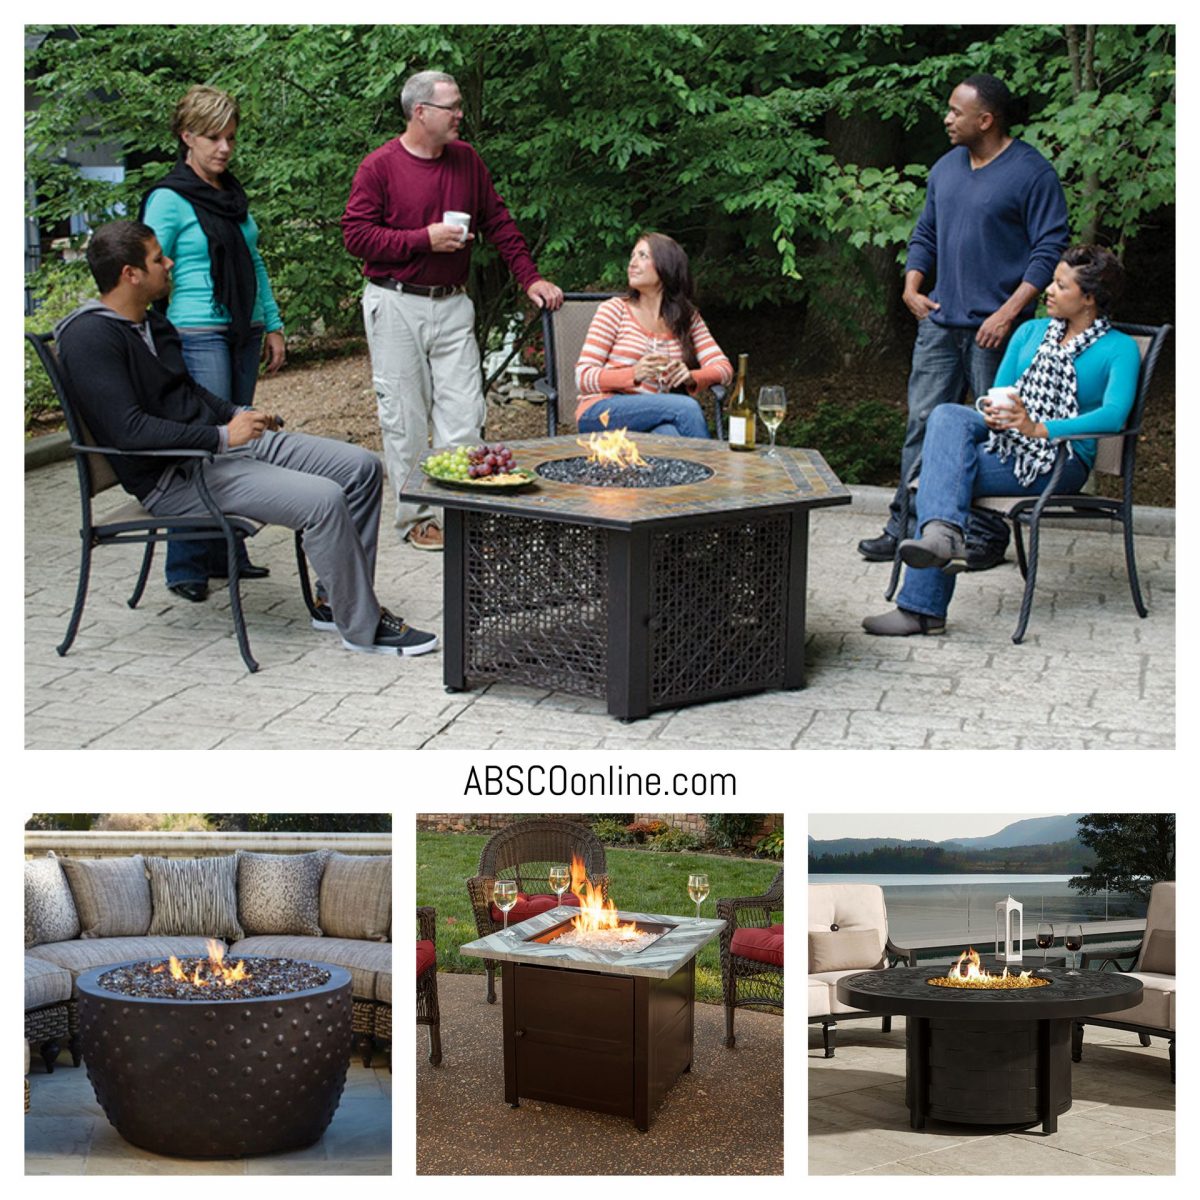 Firepits at ABSCO Fireplace & Patio - Firepit Season 2020